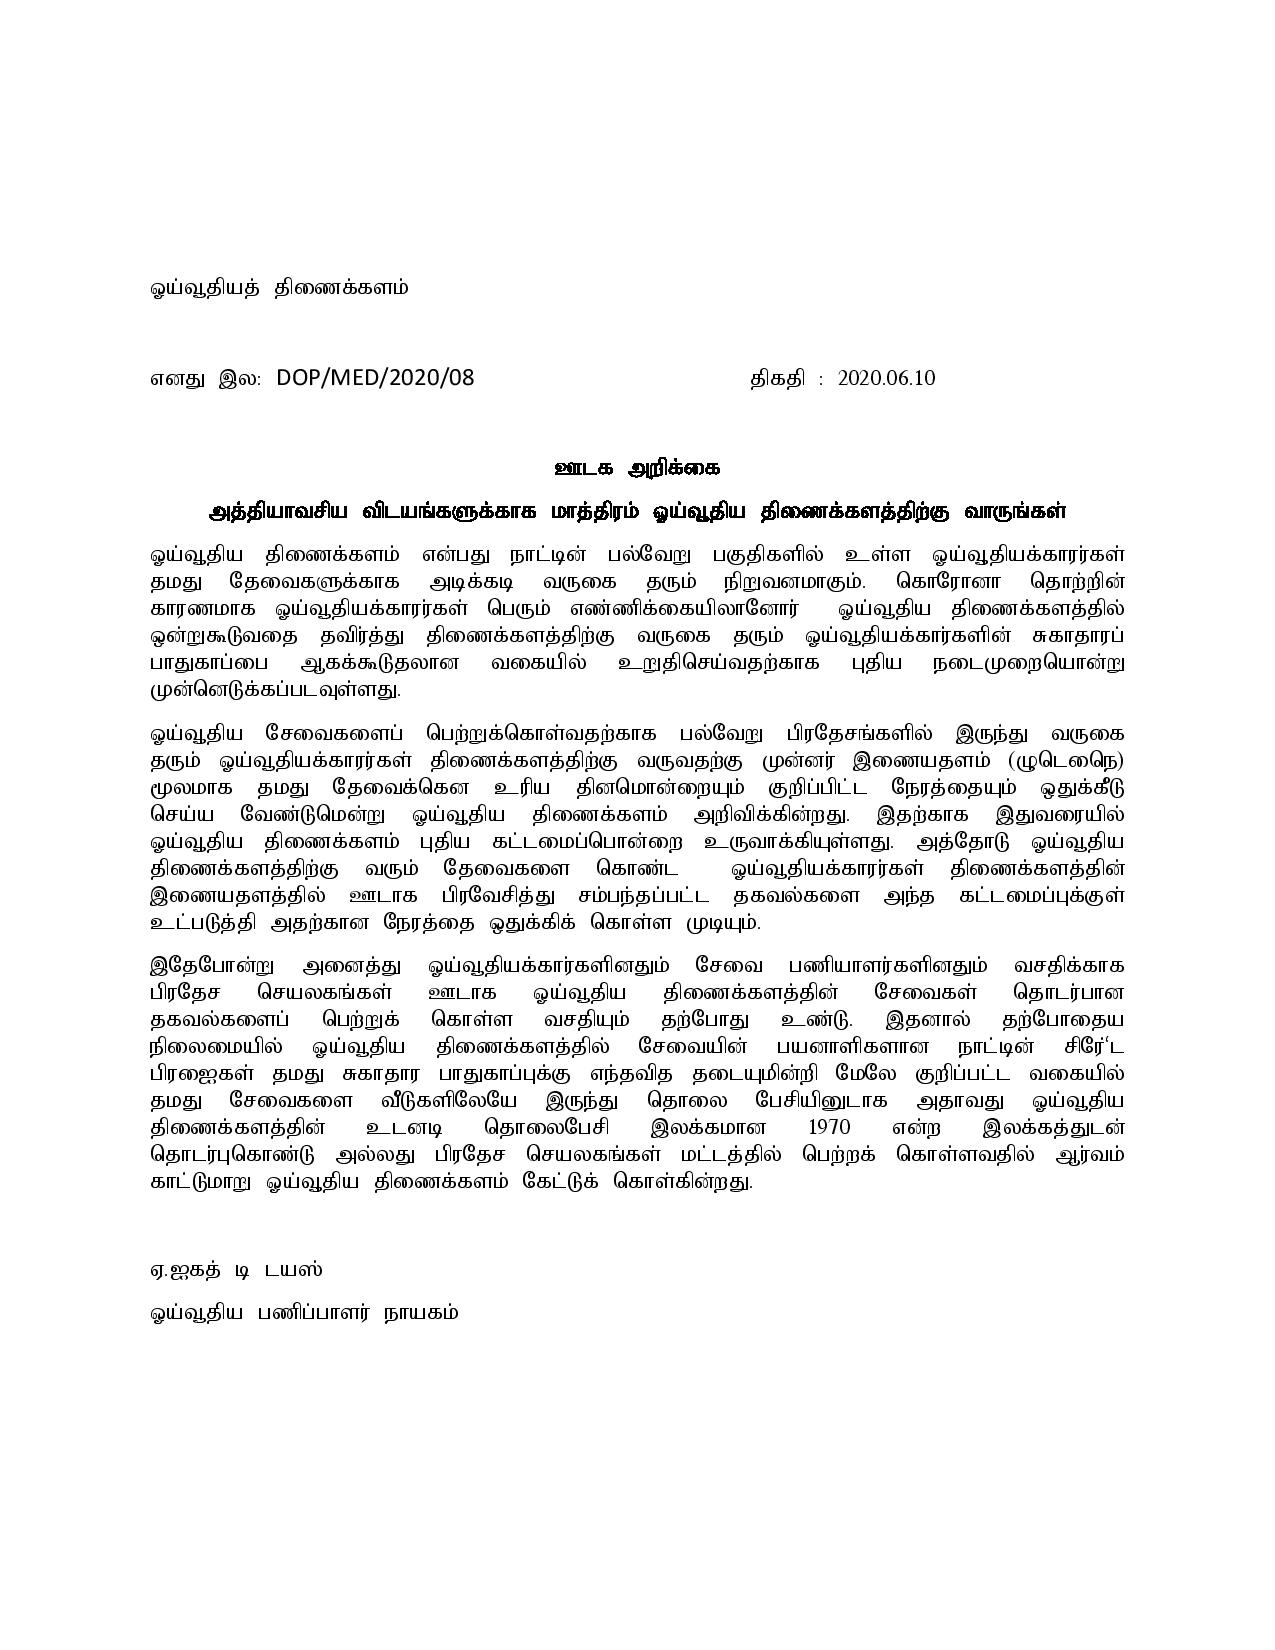 Press Release Tamil Department of Pensions page 002